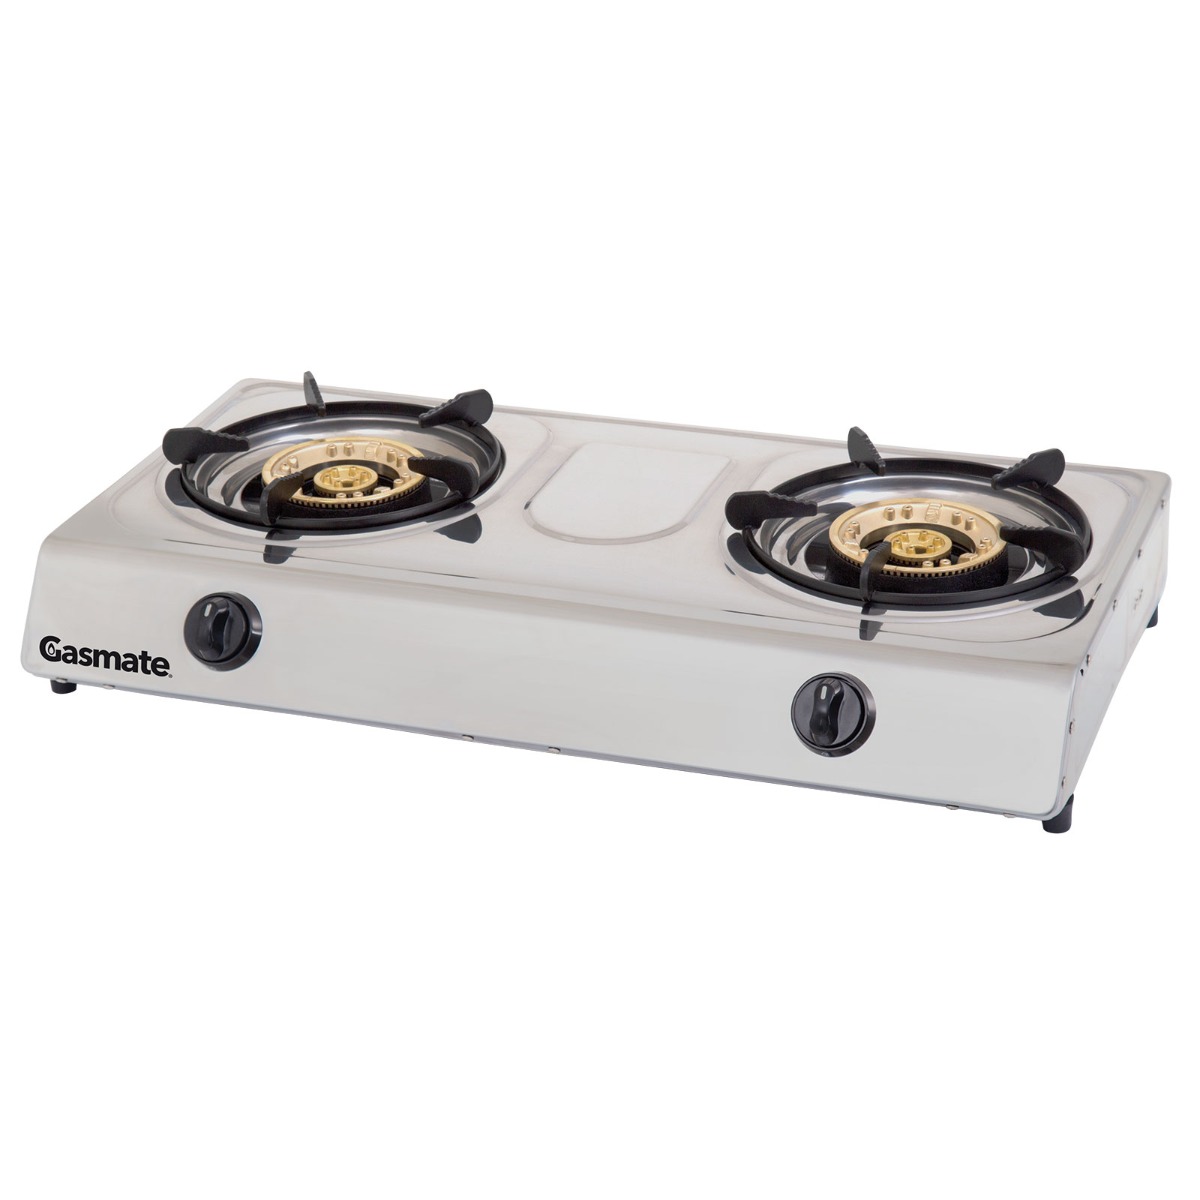 Twin Burner Stainless Steel Wok Style Cooker